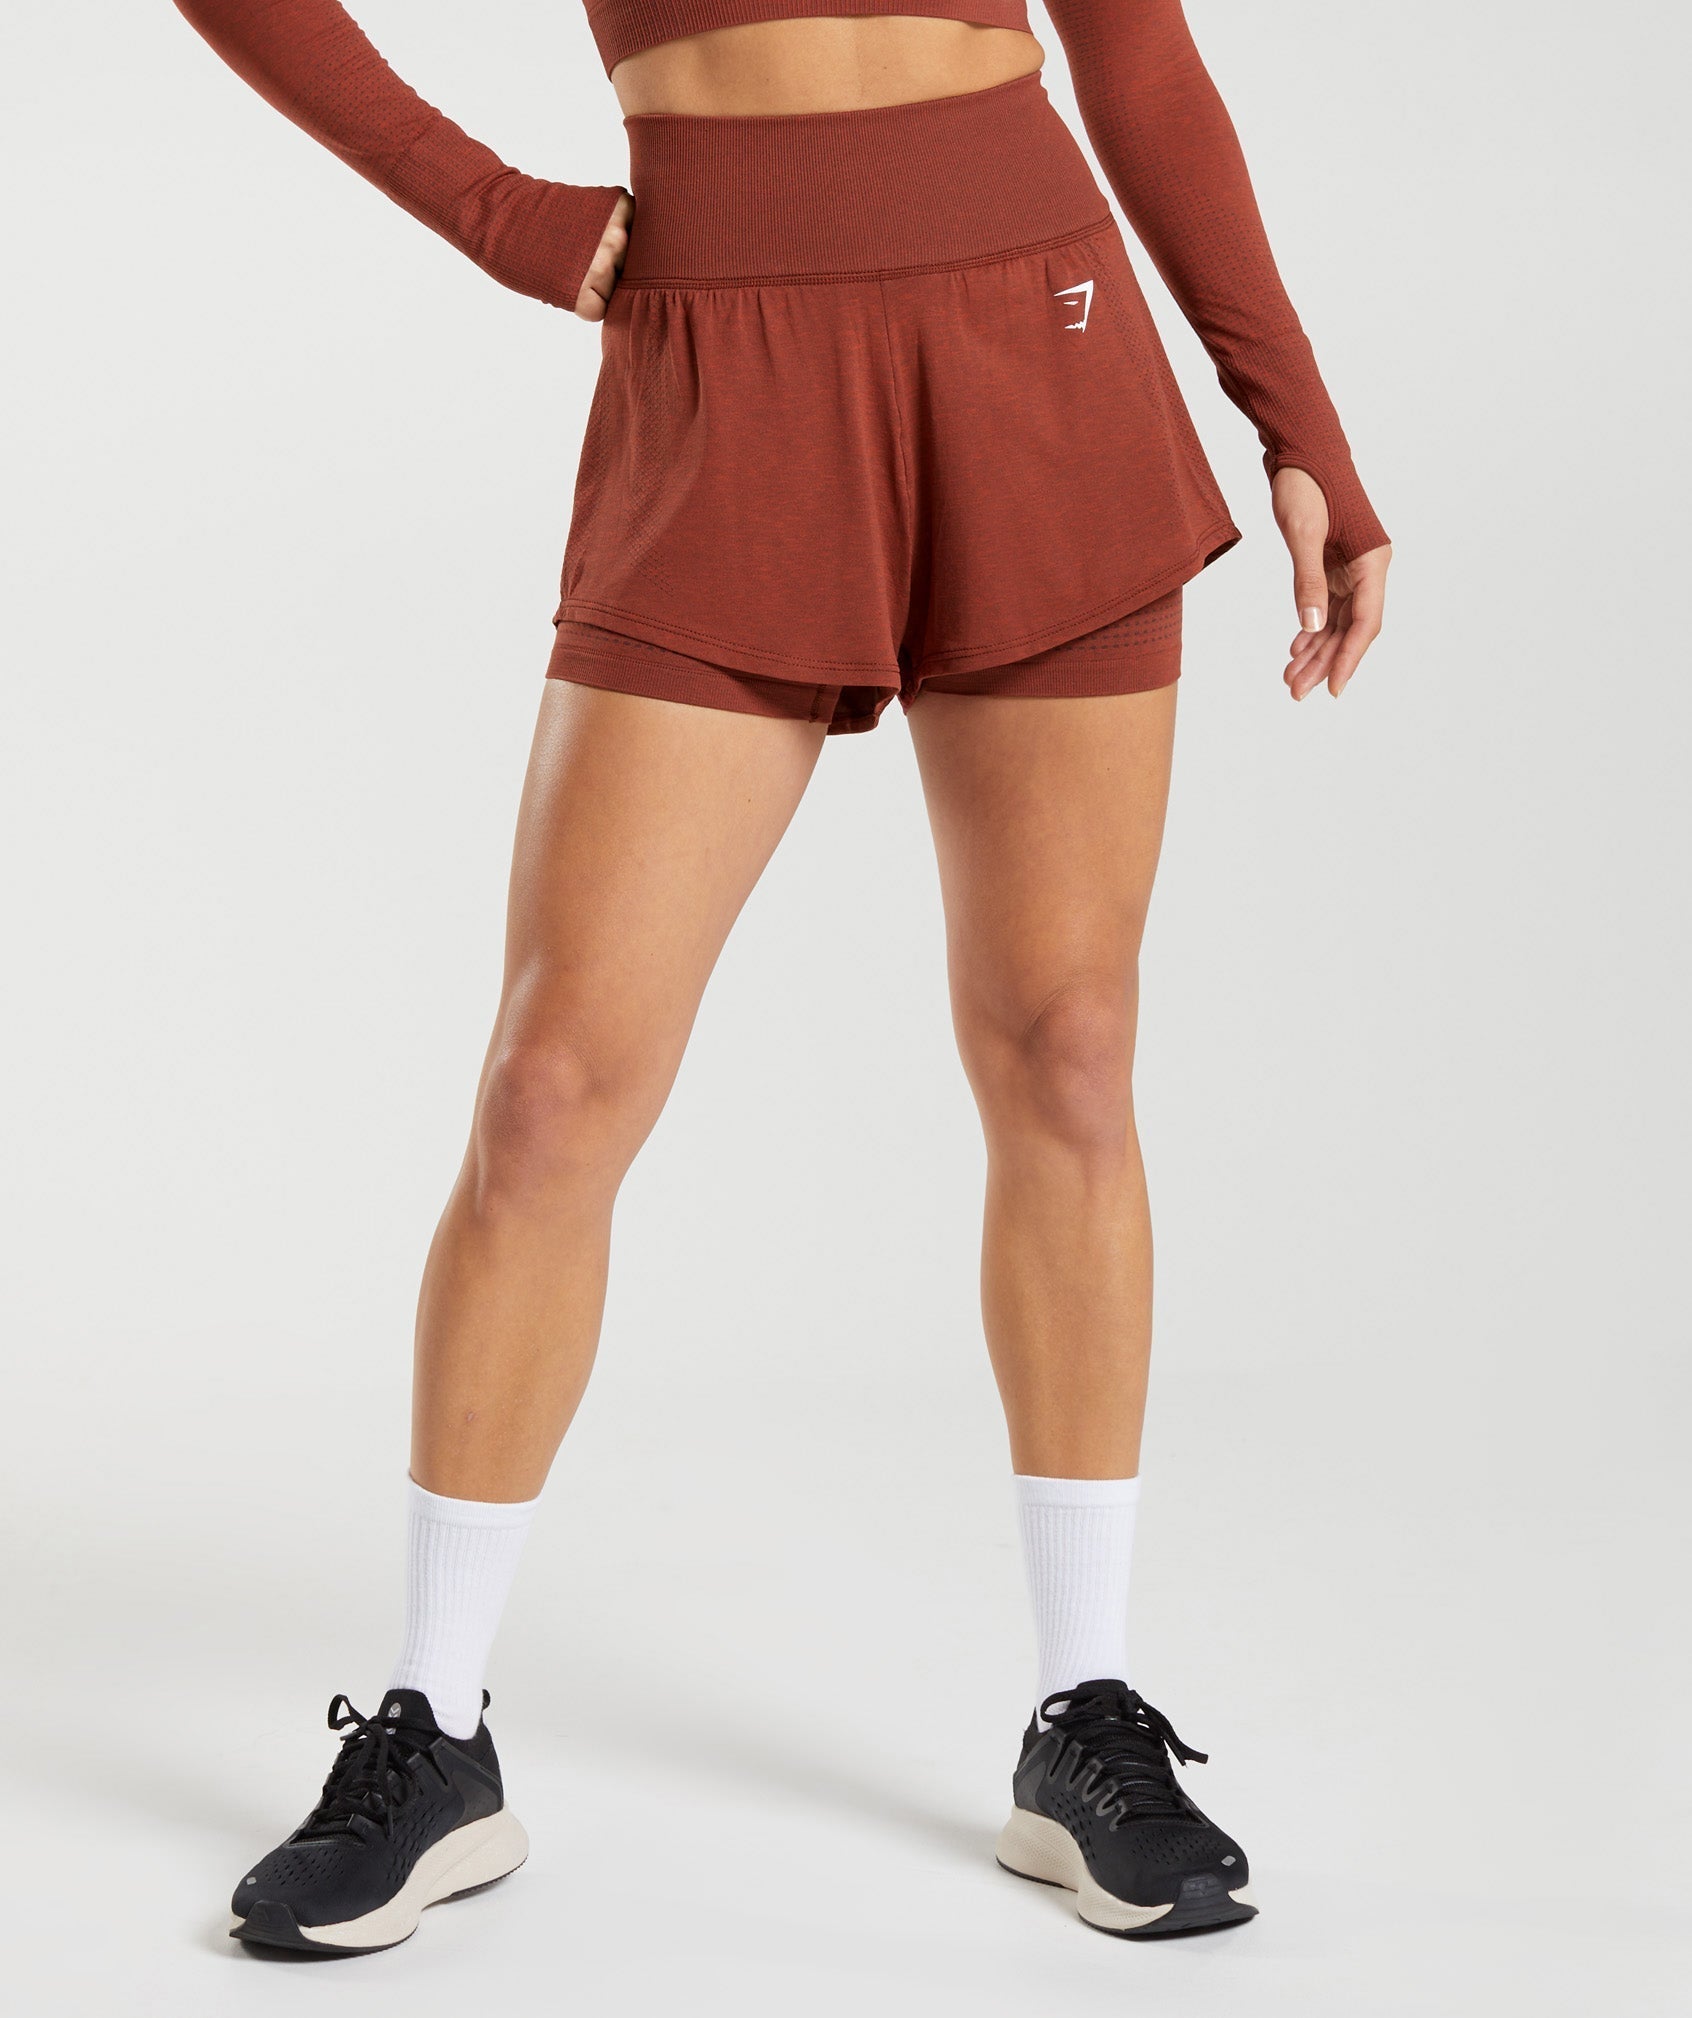 Vital Seamless 2.0 2-in-1 Shorts in Brick Red Marl - view 1